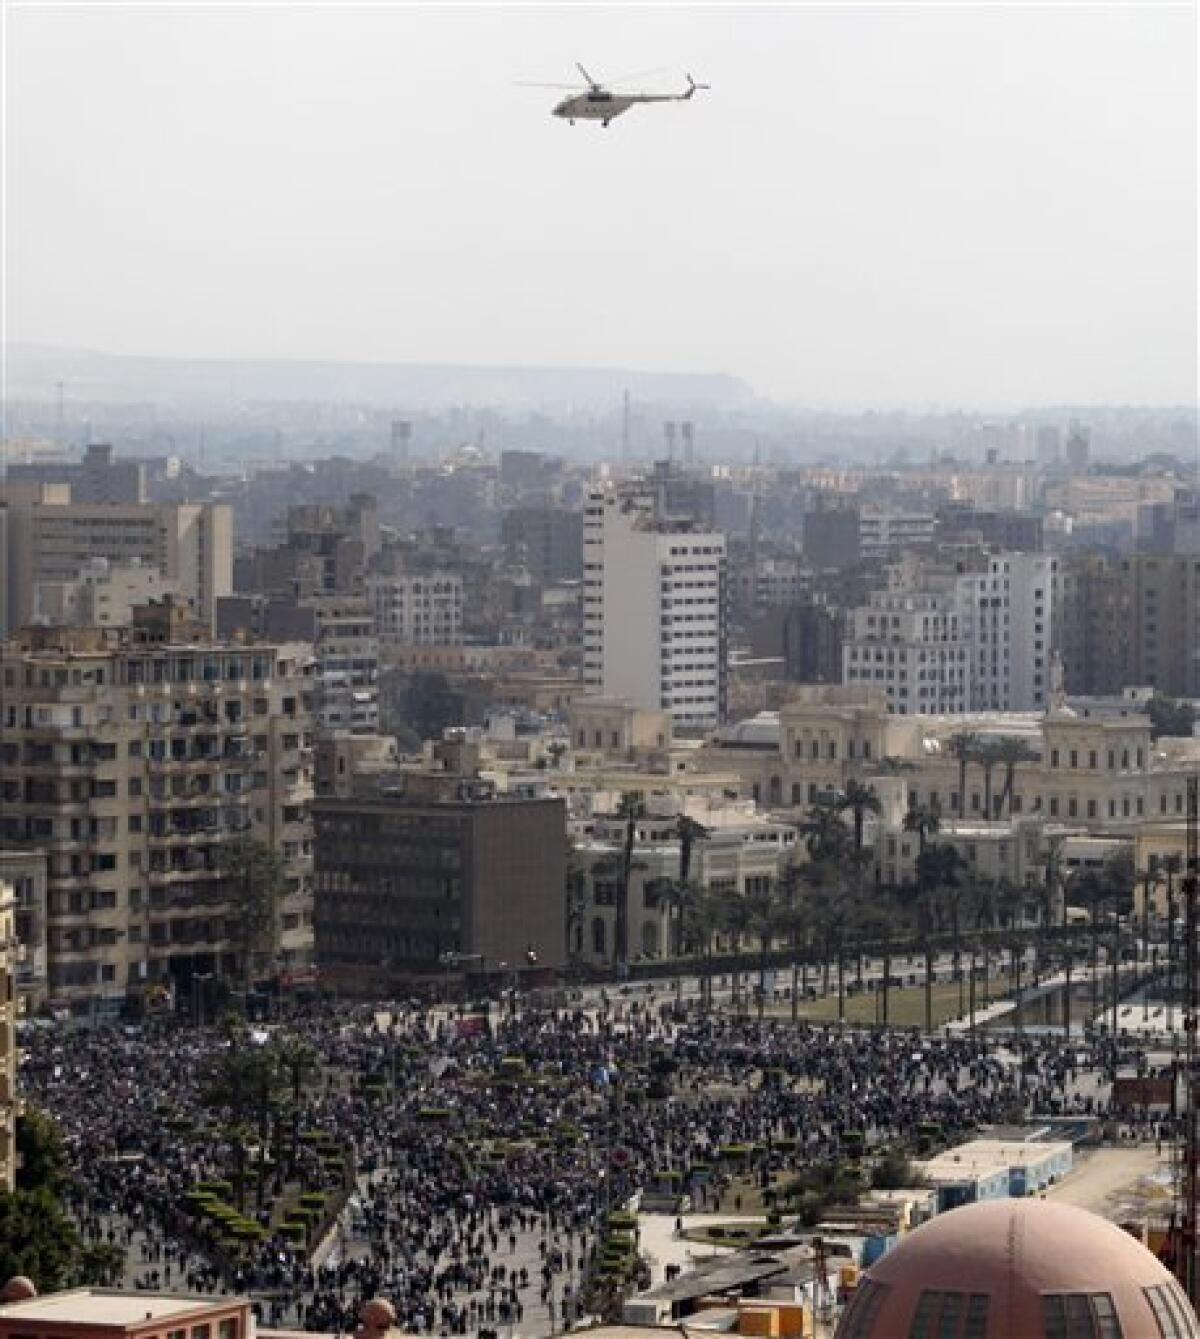 A mililtary helicopter flies protestors gathered in Tahrir, or Liberation Square, in Cairo, Egypt, Monday Jan. 31, 2011. A coalition of opposition groups called for a million people to take to Cairo's streets Tuesday to demand the removal of President Hosni Mubarak. (AP Photo/Lefteris Pitarakis)